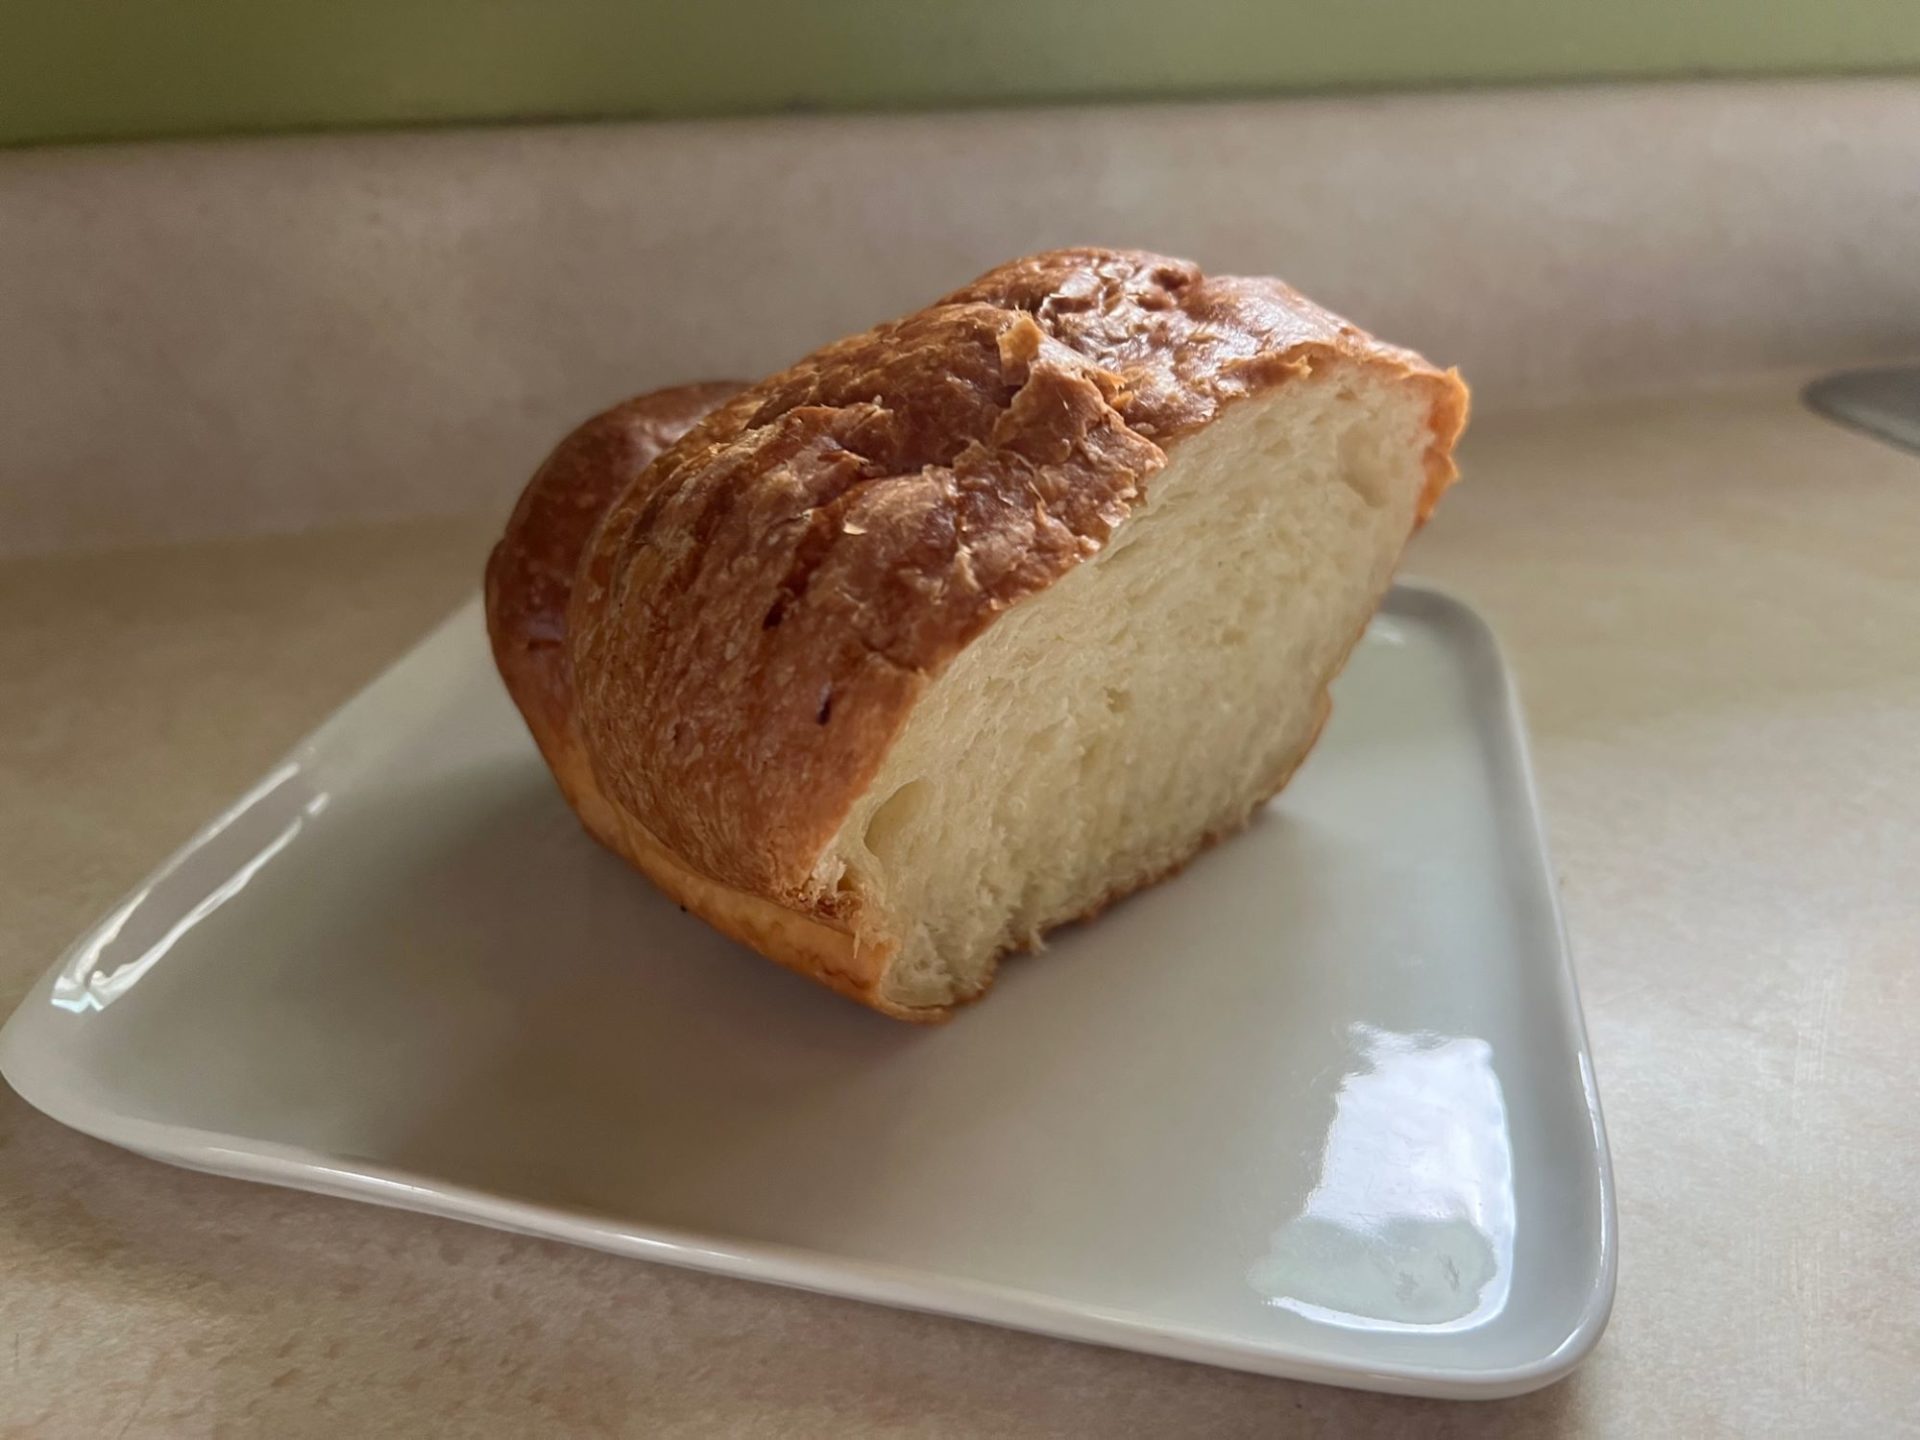 A half loaf of bread made from croissant dough, sitting on a square white plated on a light colored countertop.